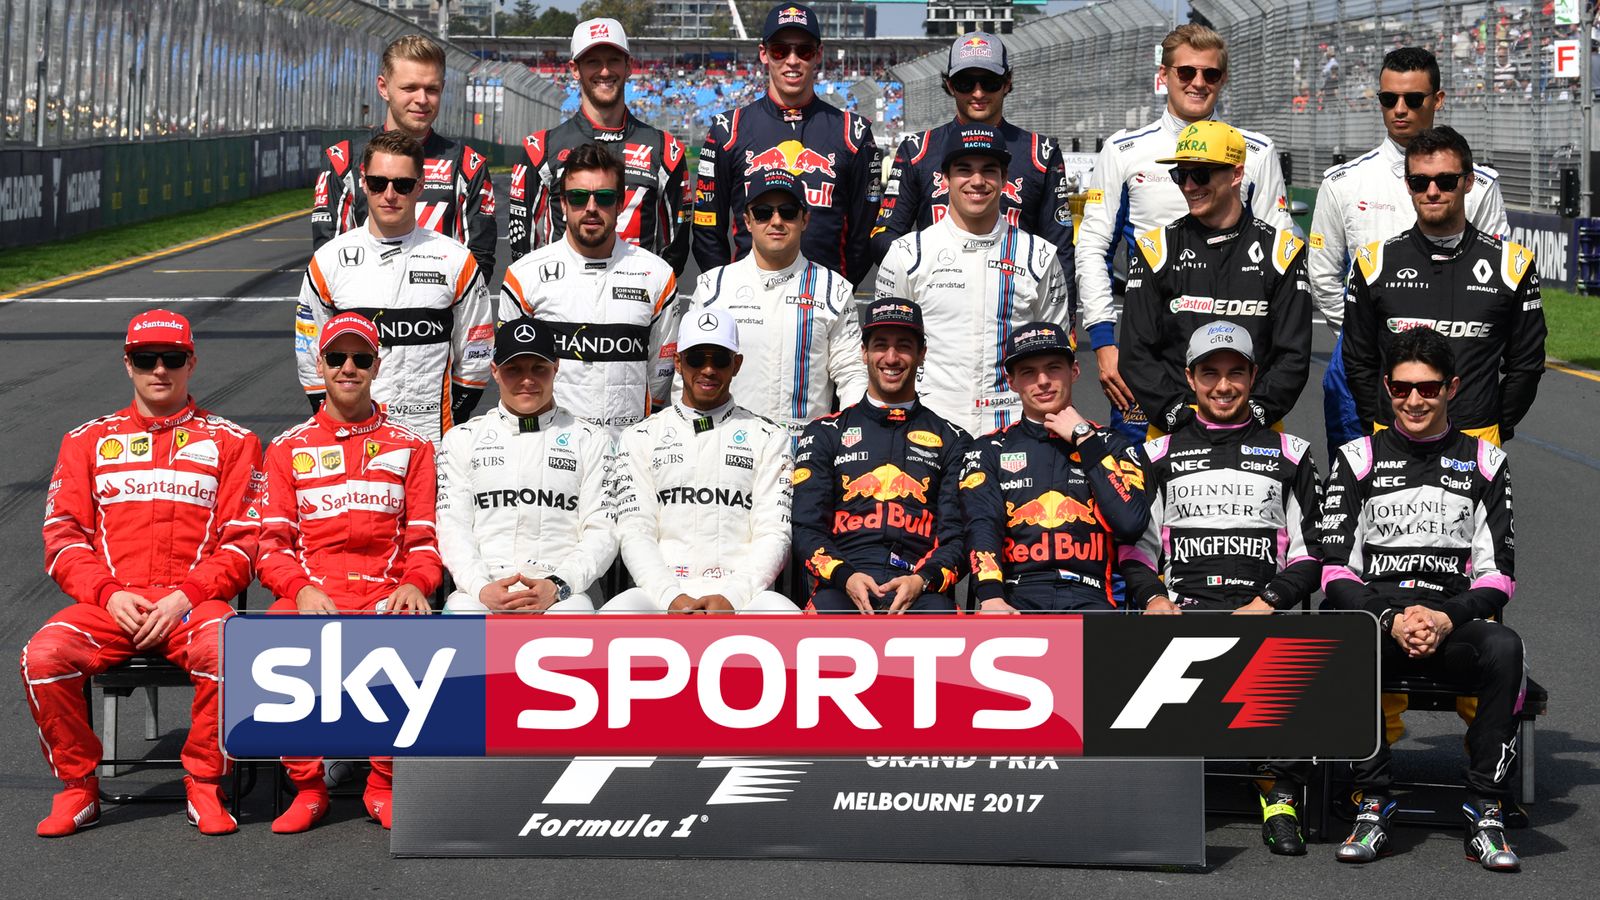 Sky Sports F1 open to comments | F1 News